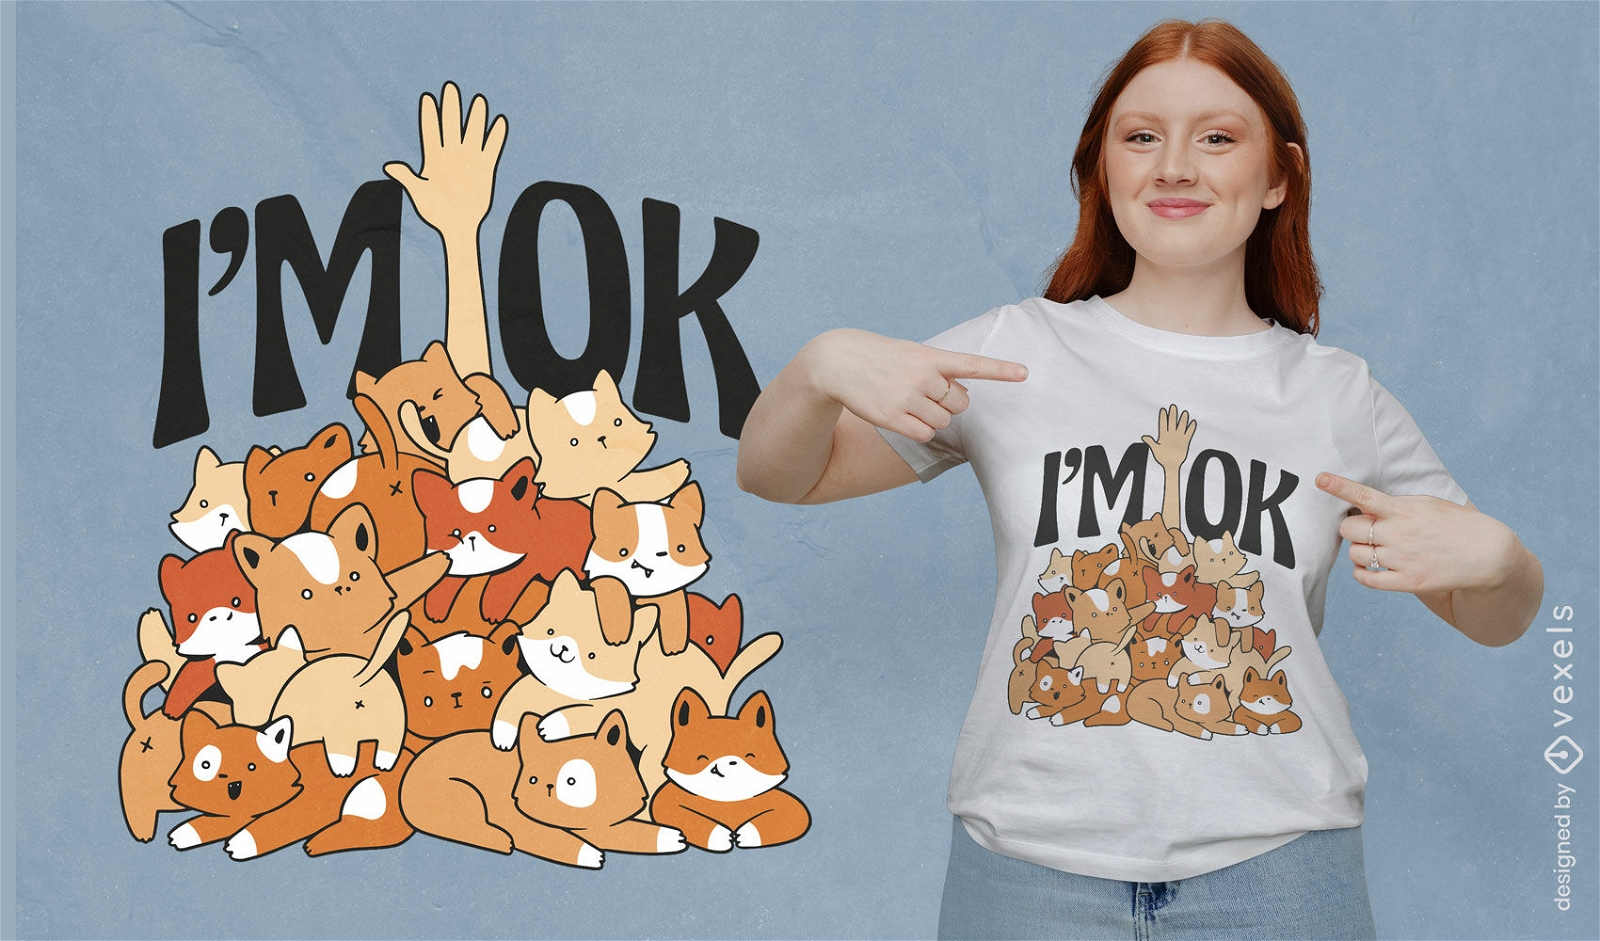 Cute pile of cats funny t-shirt design